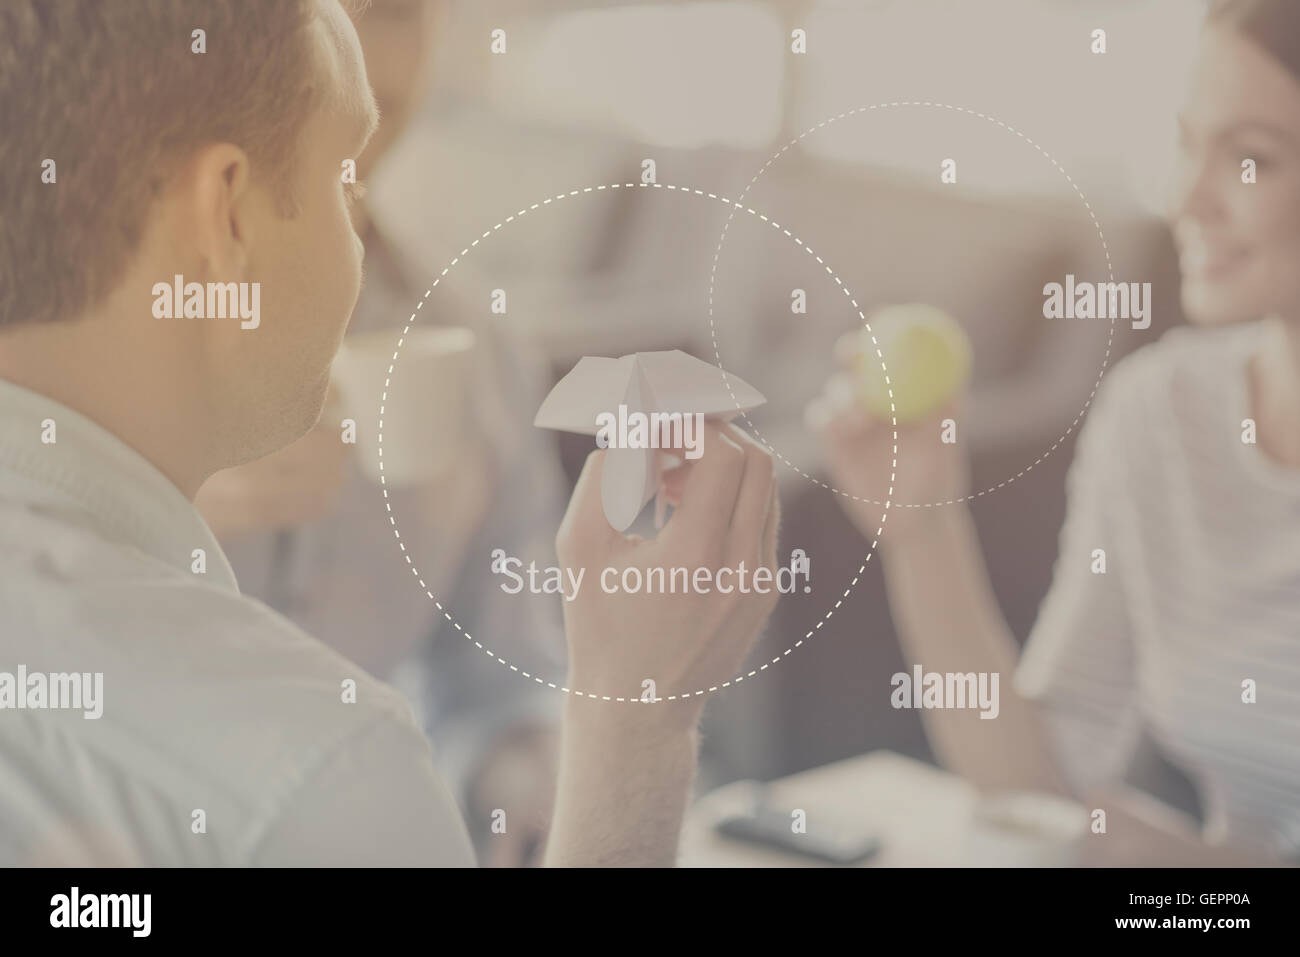 Stay connected concept Stock Photo